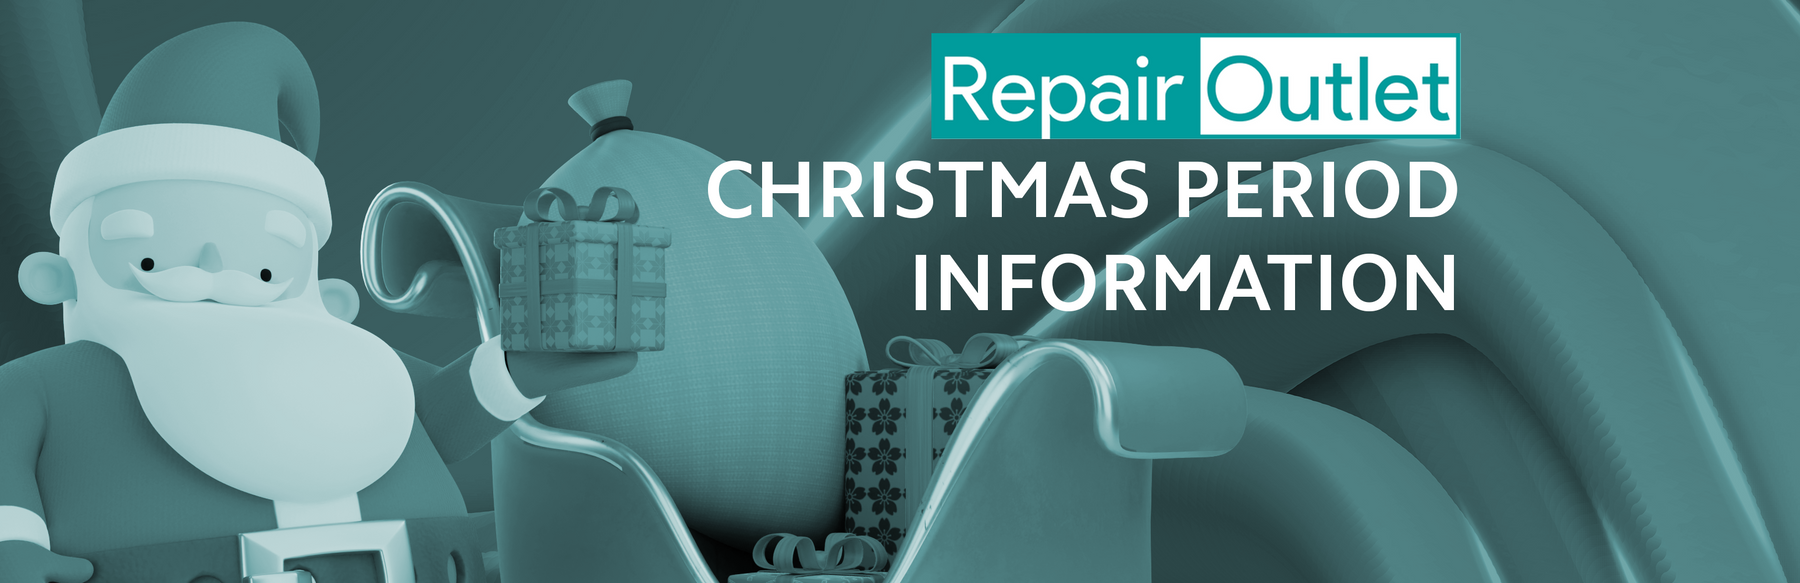 Important Repair Outlet Christmas Period Information!